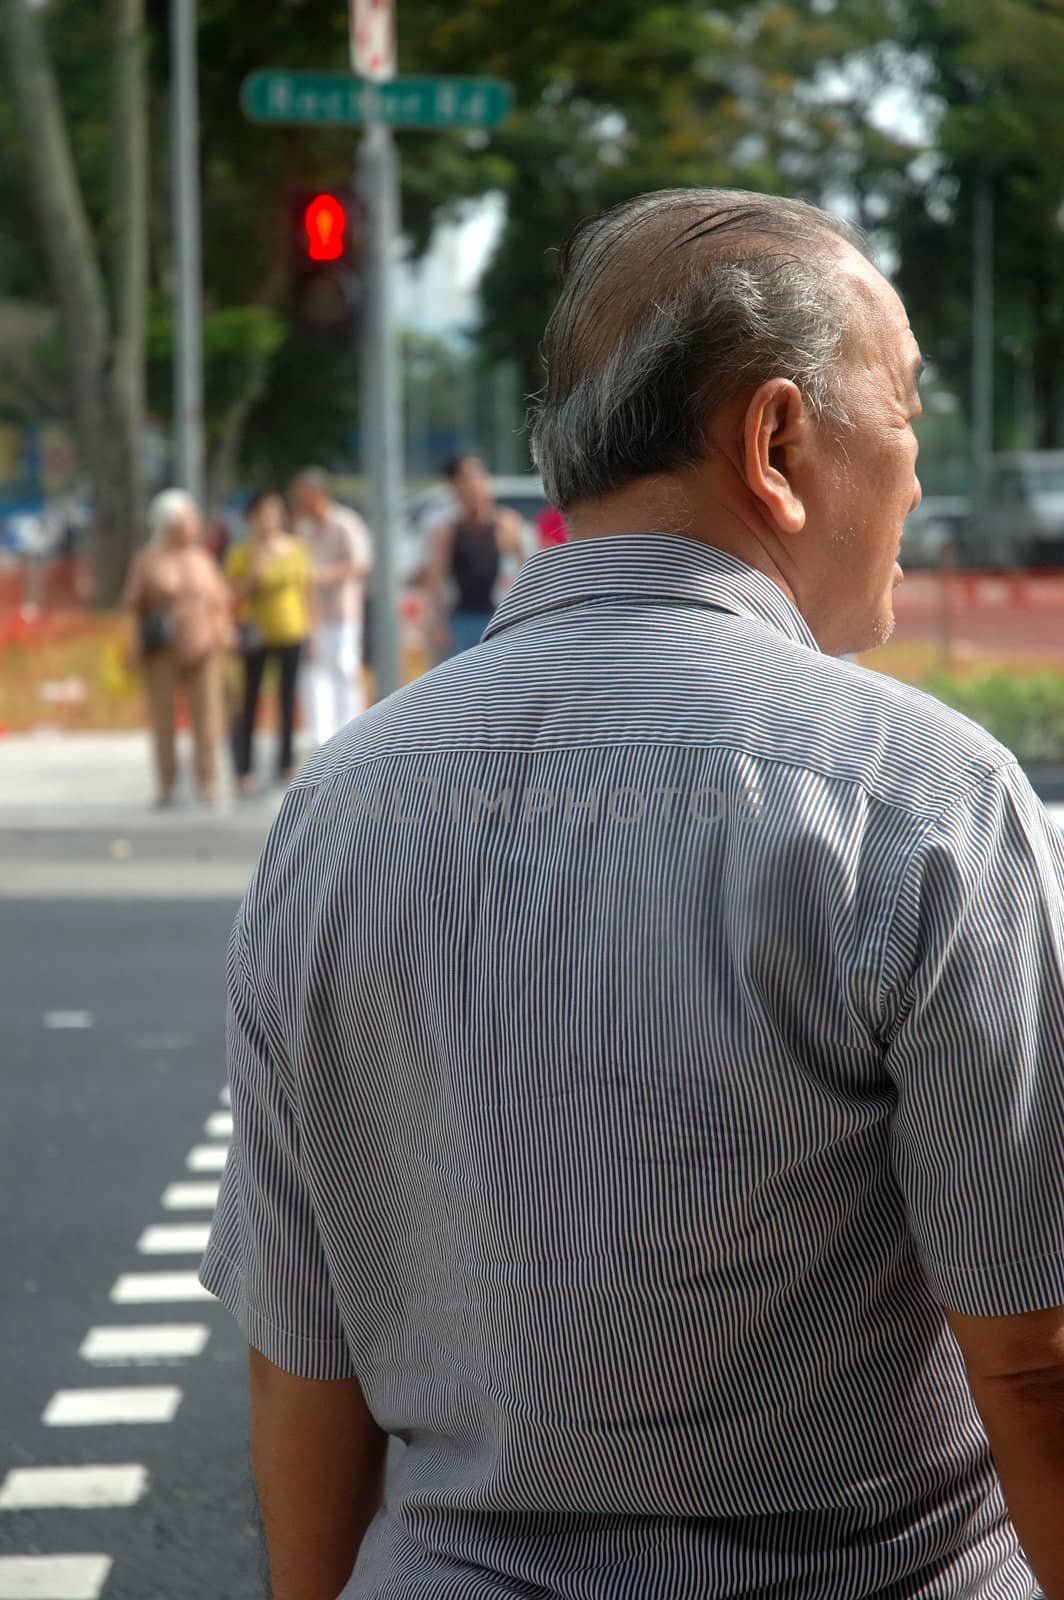 Singapore, Singapore - January 18, 2014: Old man waiting for red light to get across the road.